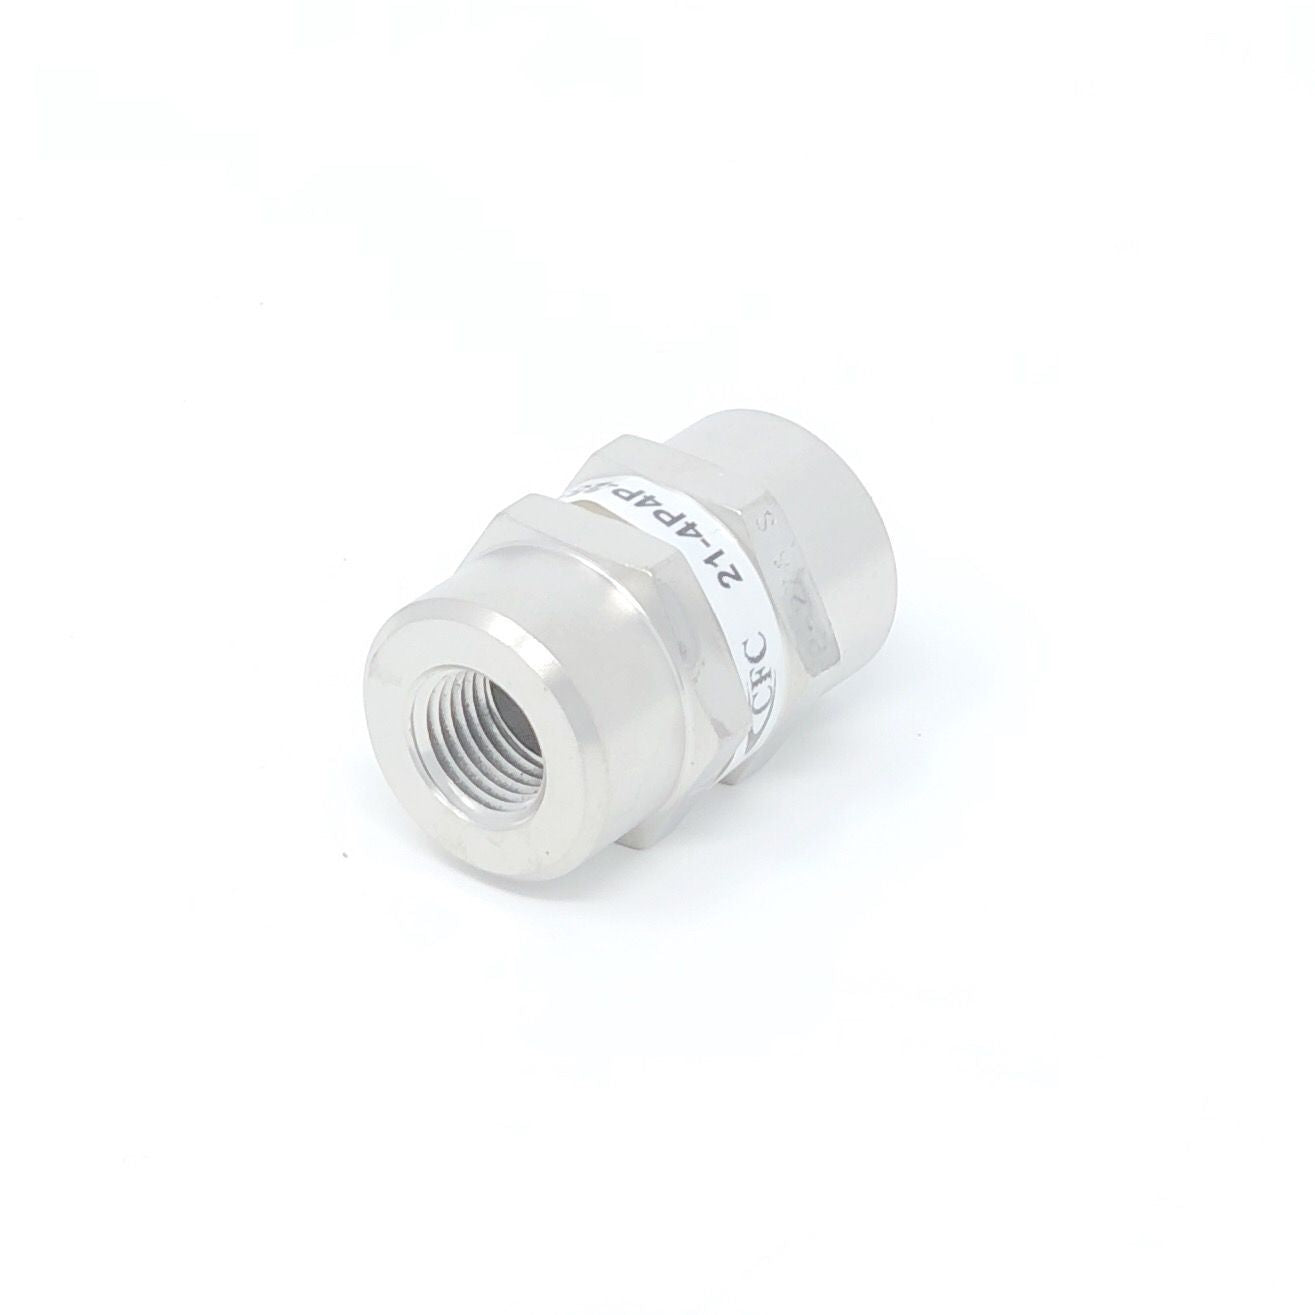 21-12P12P-100S : Chase High Pressure Inline Filter, 3000psi, 3/4" NPT, 100 Micron, No Visual Indicator, No Bypass